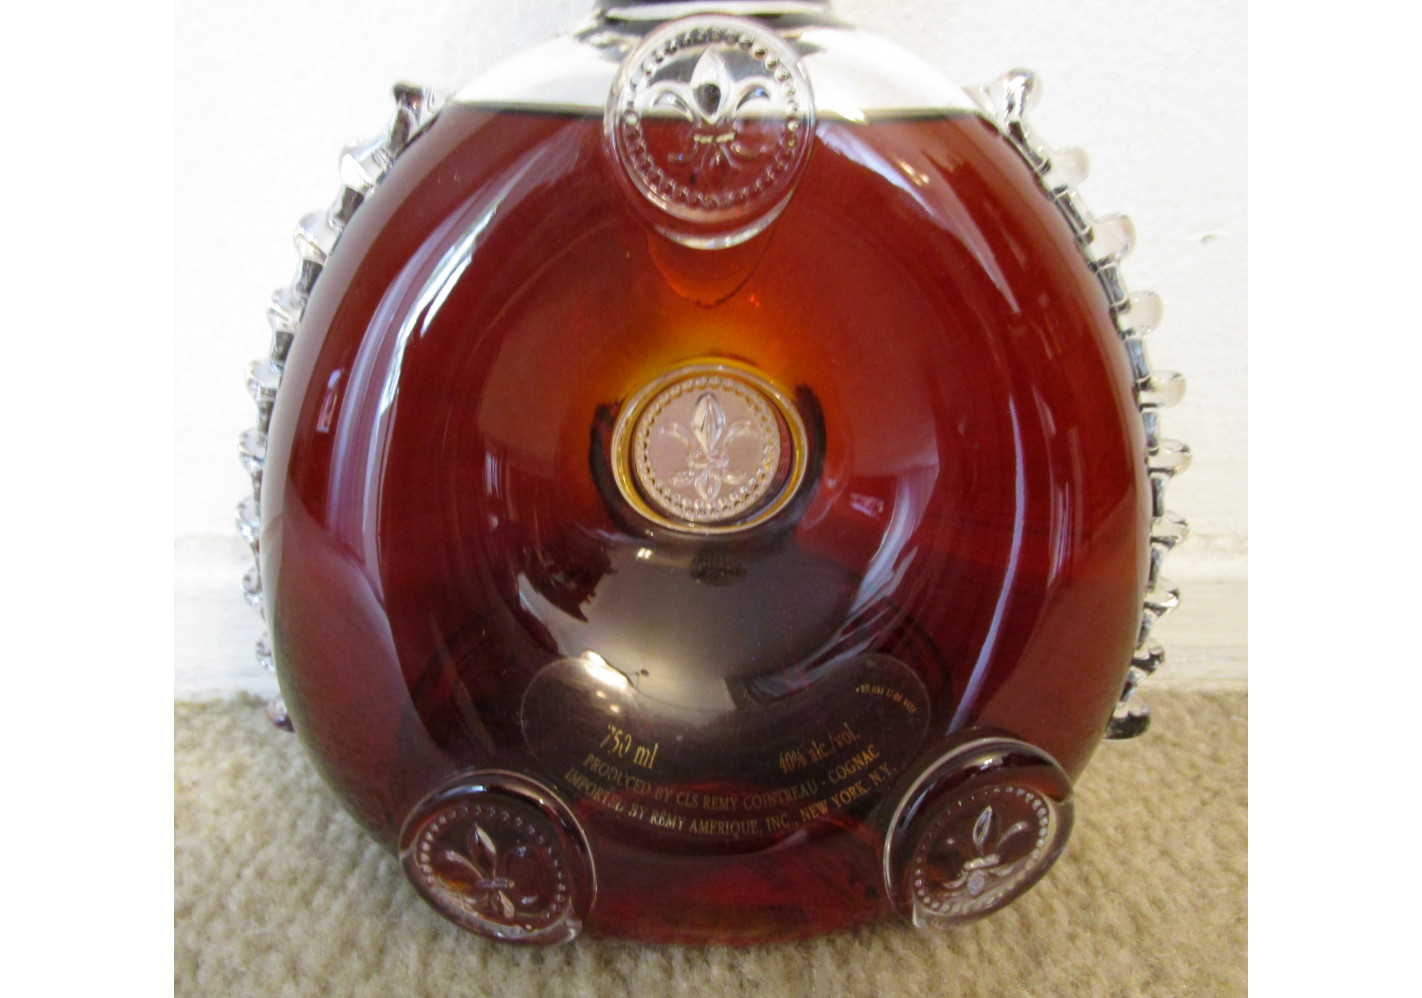 Rémy Martin Louis XIII Time Collection Cognac: Buy Online and Find